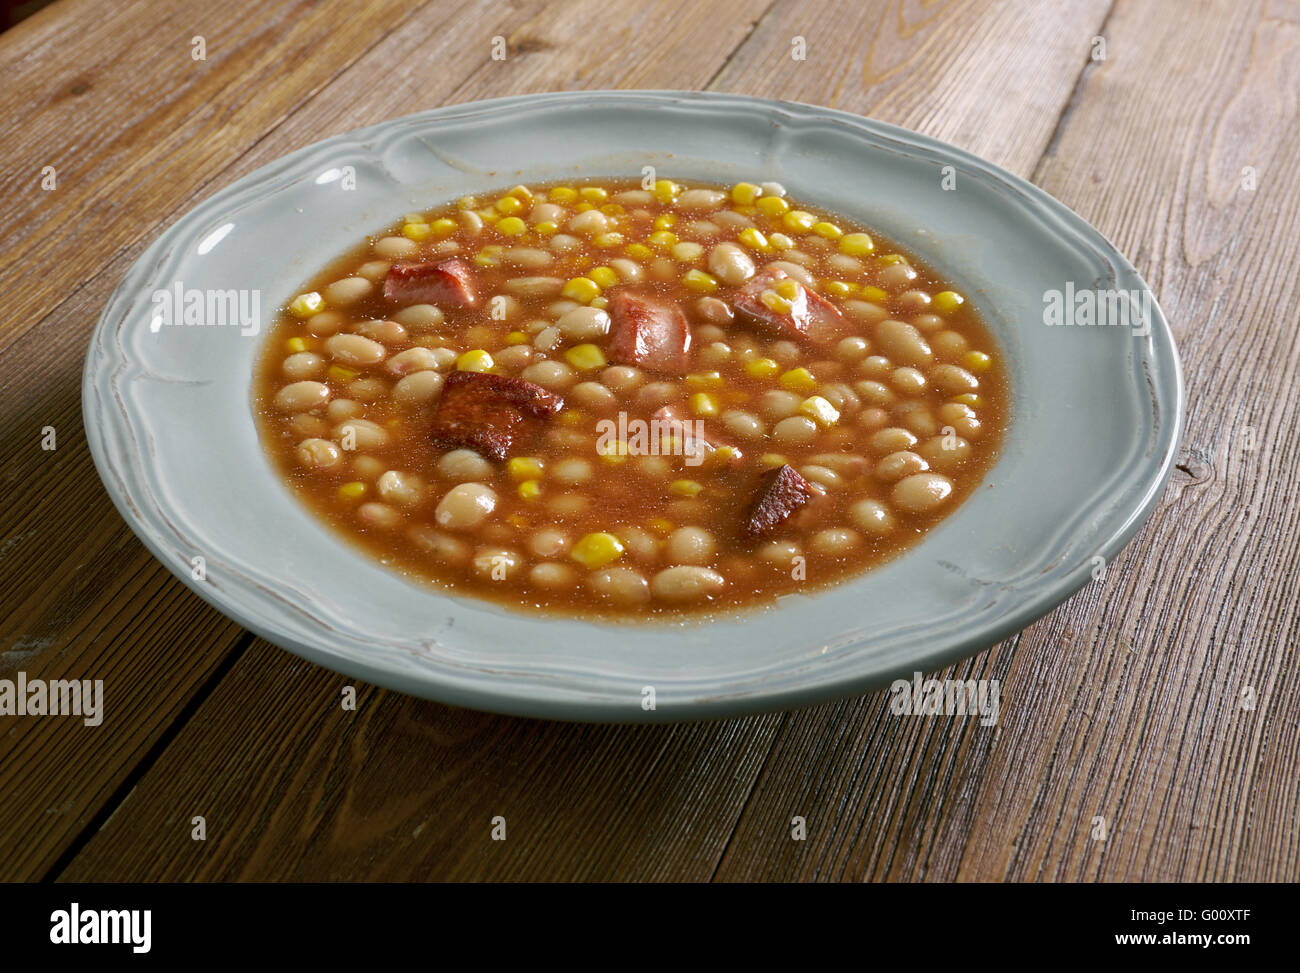 https://c8.alamy.com/comp/G00XTF/tihove-stew-of-corn-beans-and-peanut-butterafrican-cuisine-G00XTF.jpg